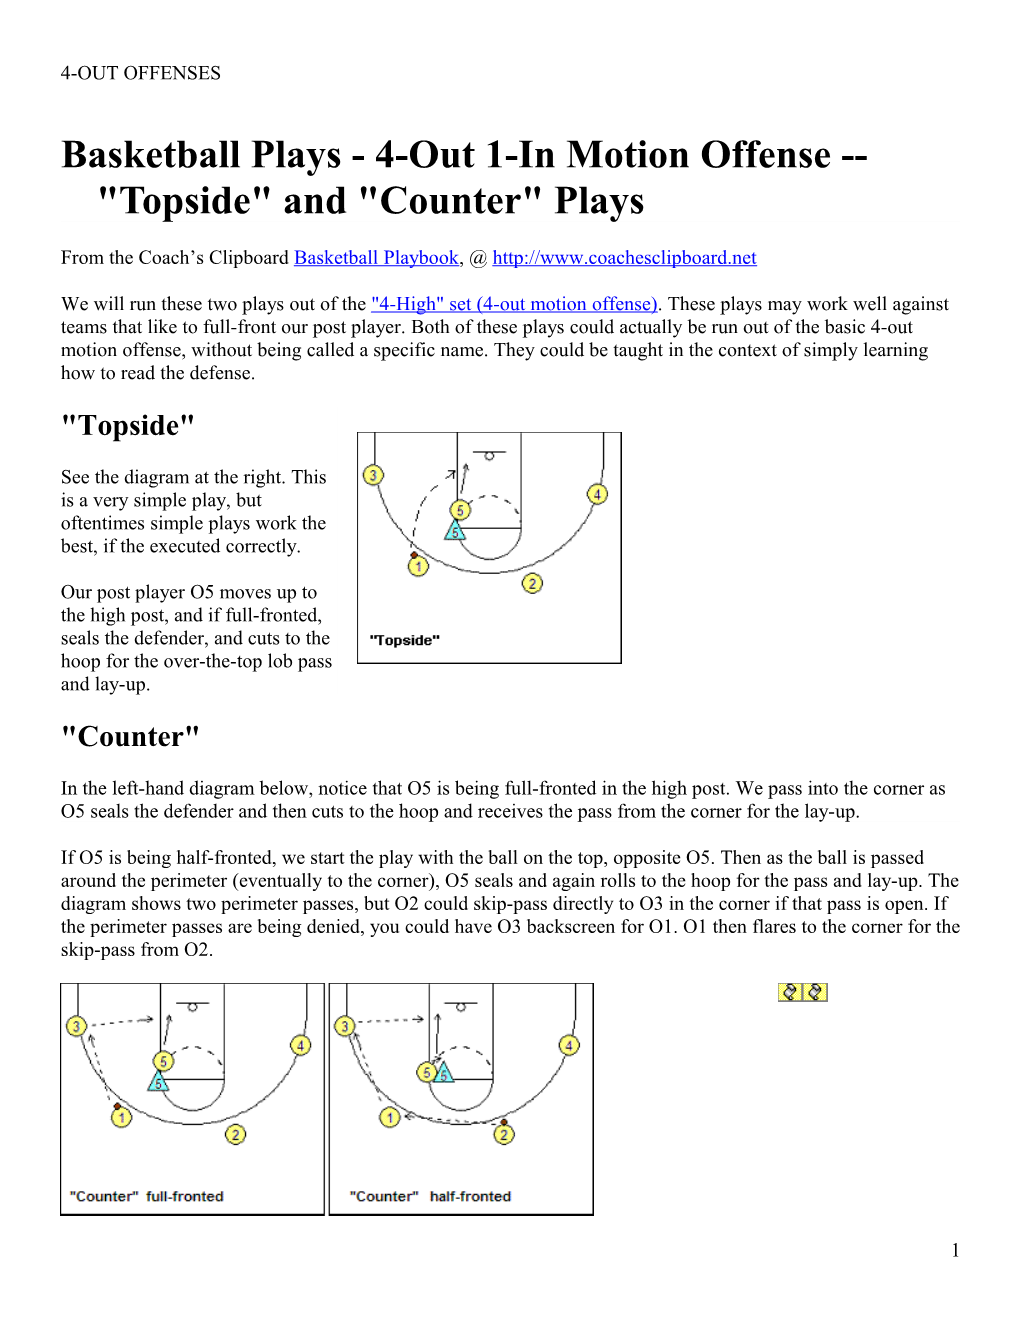 Basketball Plays - 4-Out 1-In Motion Offense Topside and Counter Plays